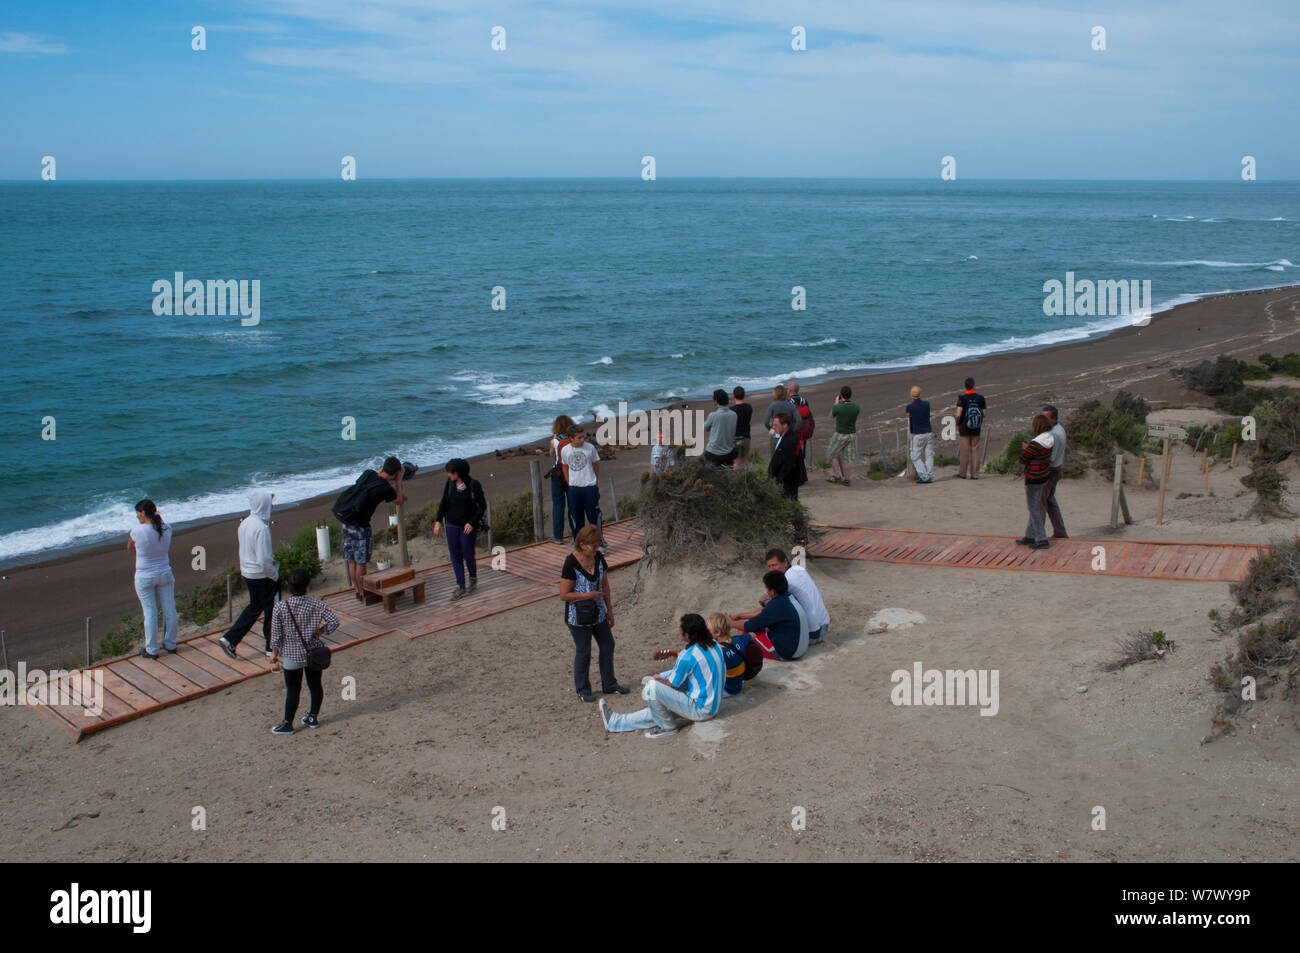 Tourists watching orcas from the beach, Punta Norte Nature Reserve, Valdes Peninsula, Chubut, Patagonia, Argentina. Stock Photo